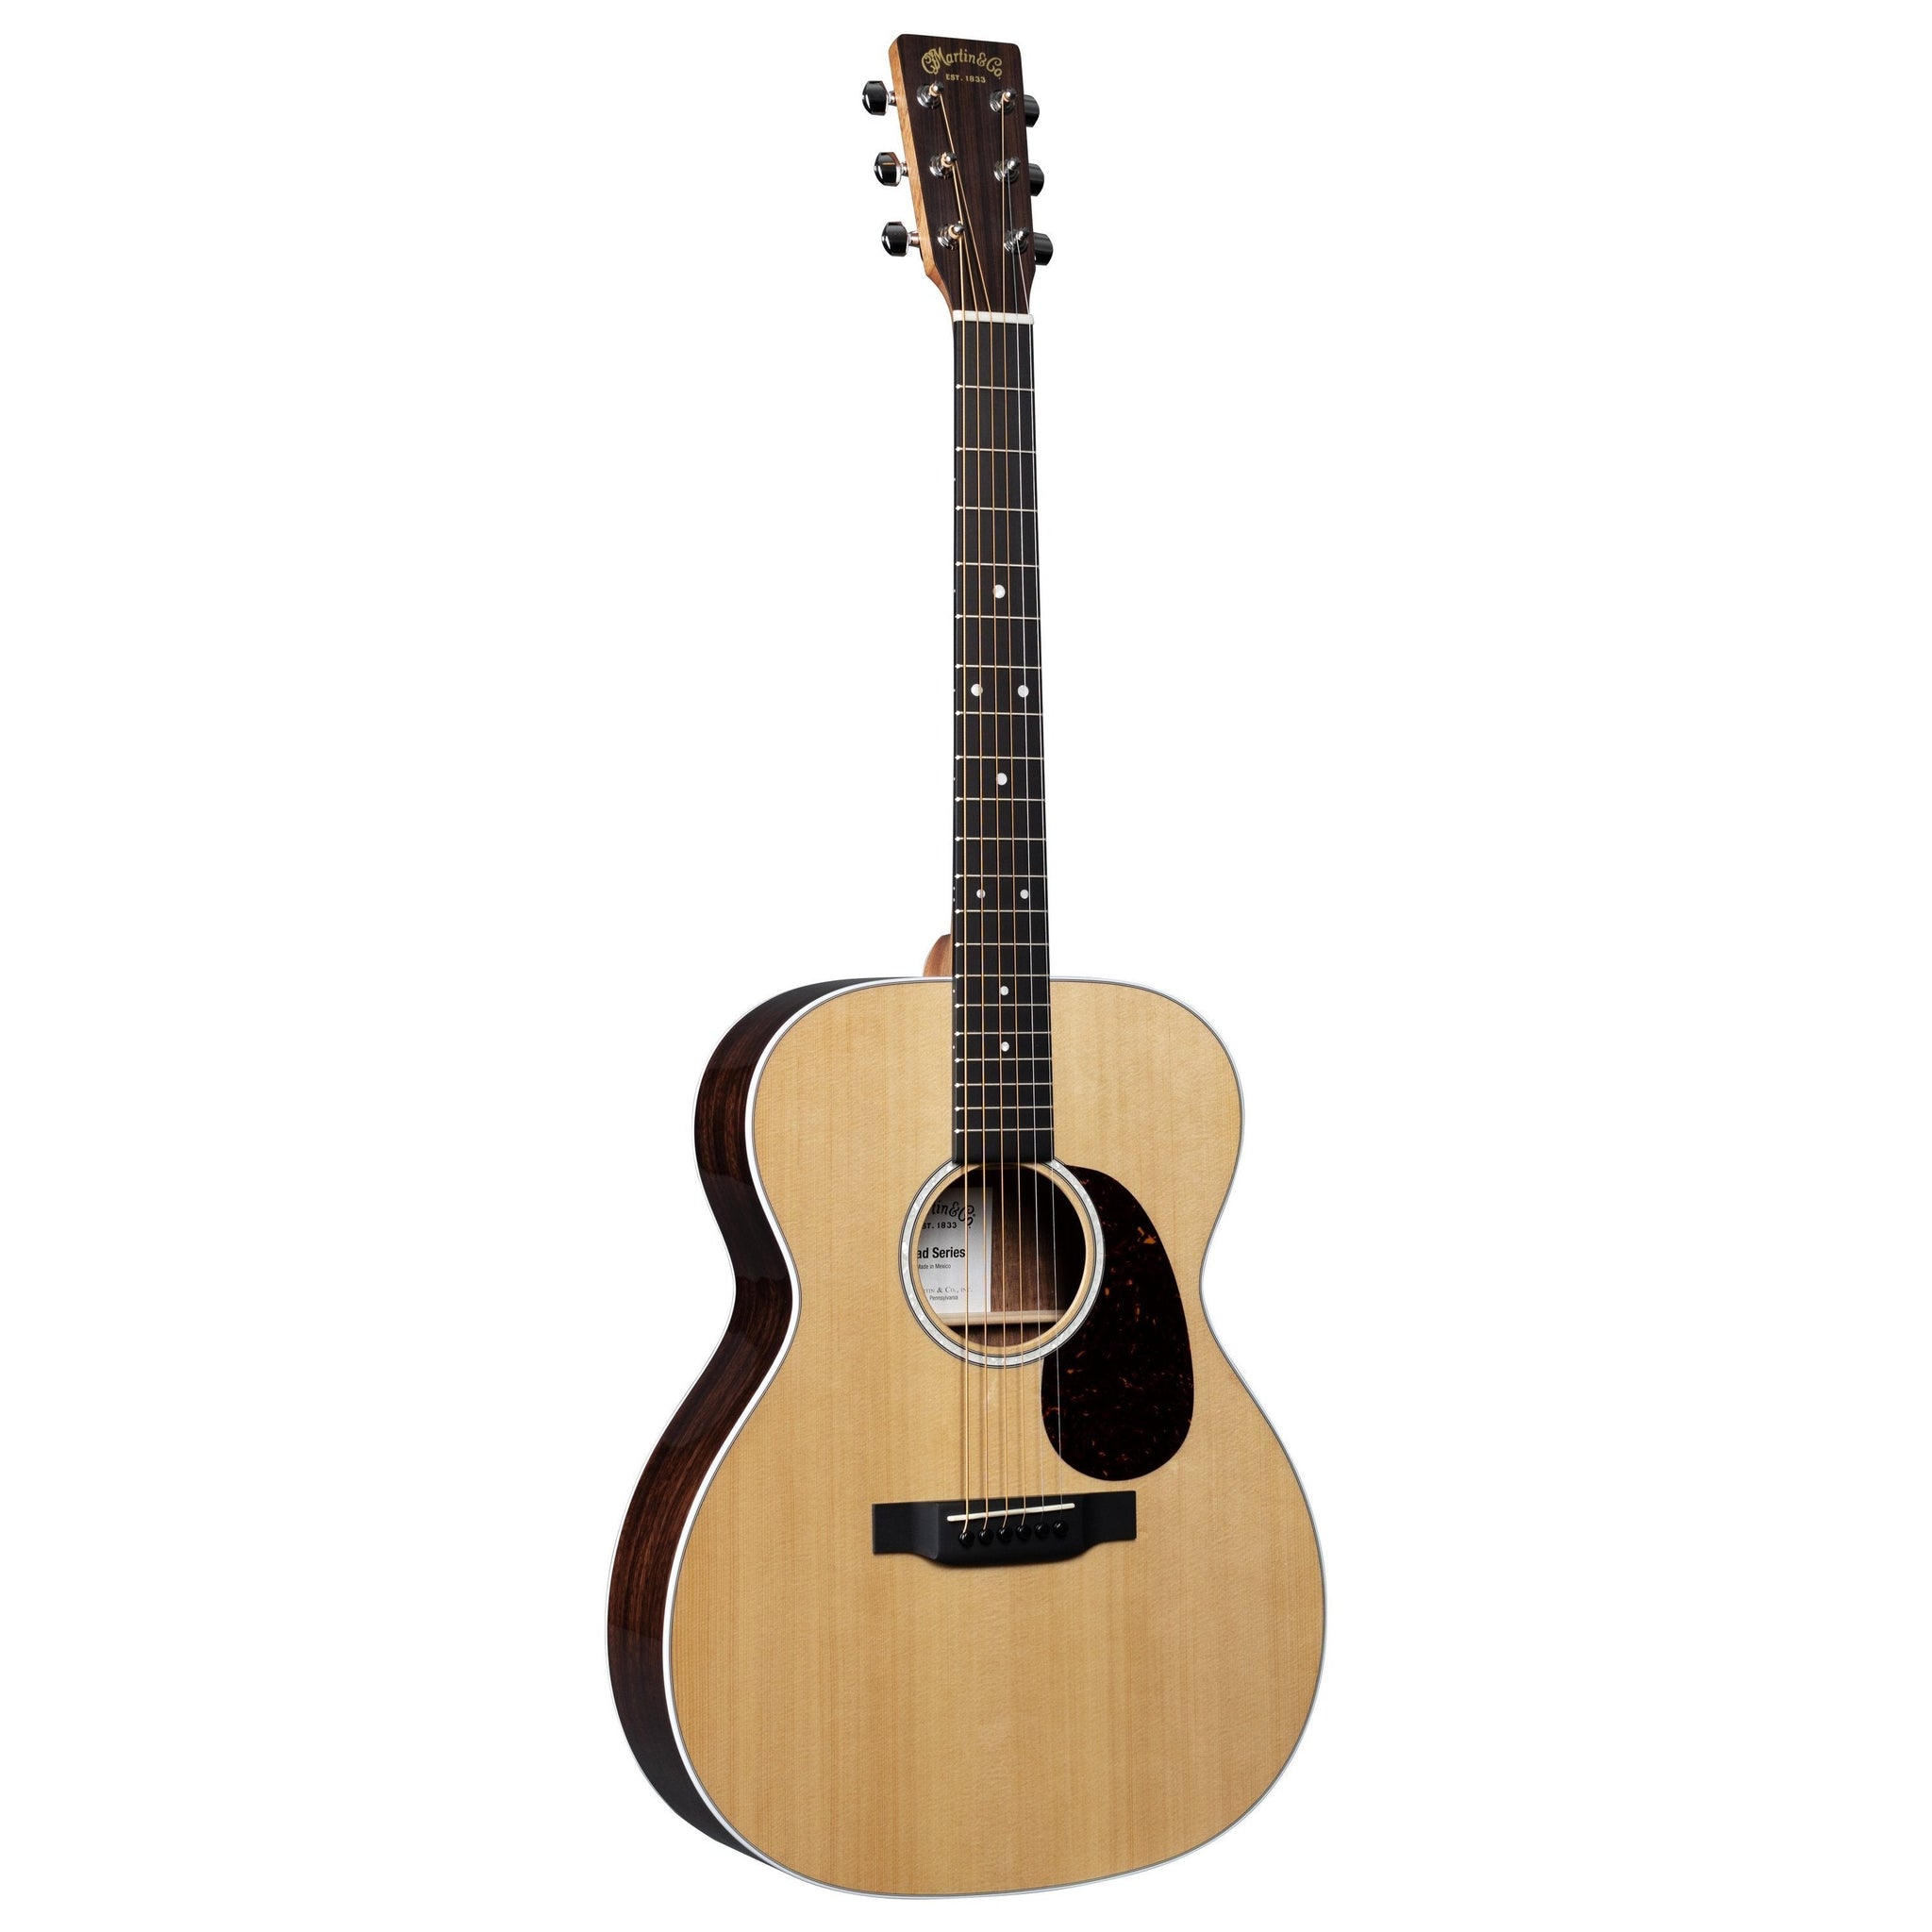 Martin 000-13E Road Series Auditorium Acoustic/Electric Guitar with Fishman MX-T Pickup and Soft Case (Discontinued)-Music World Academy